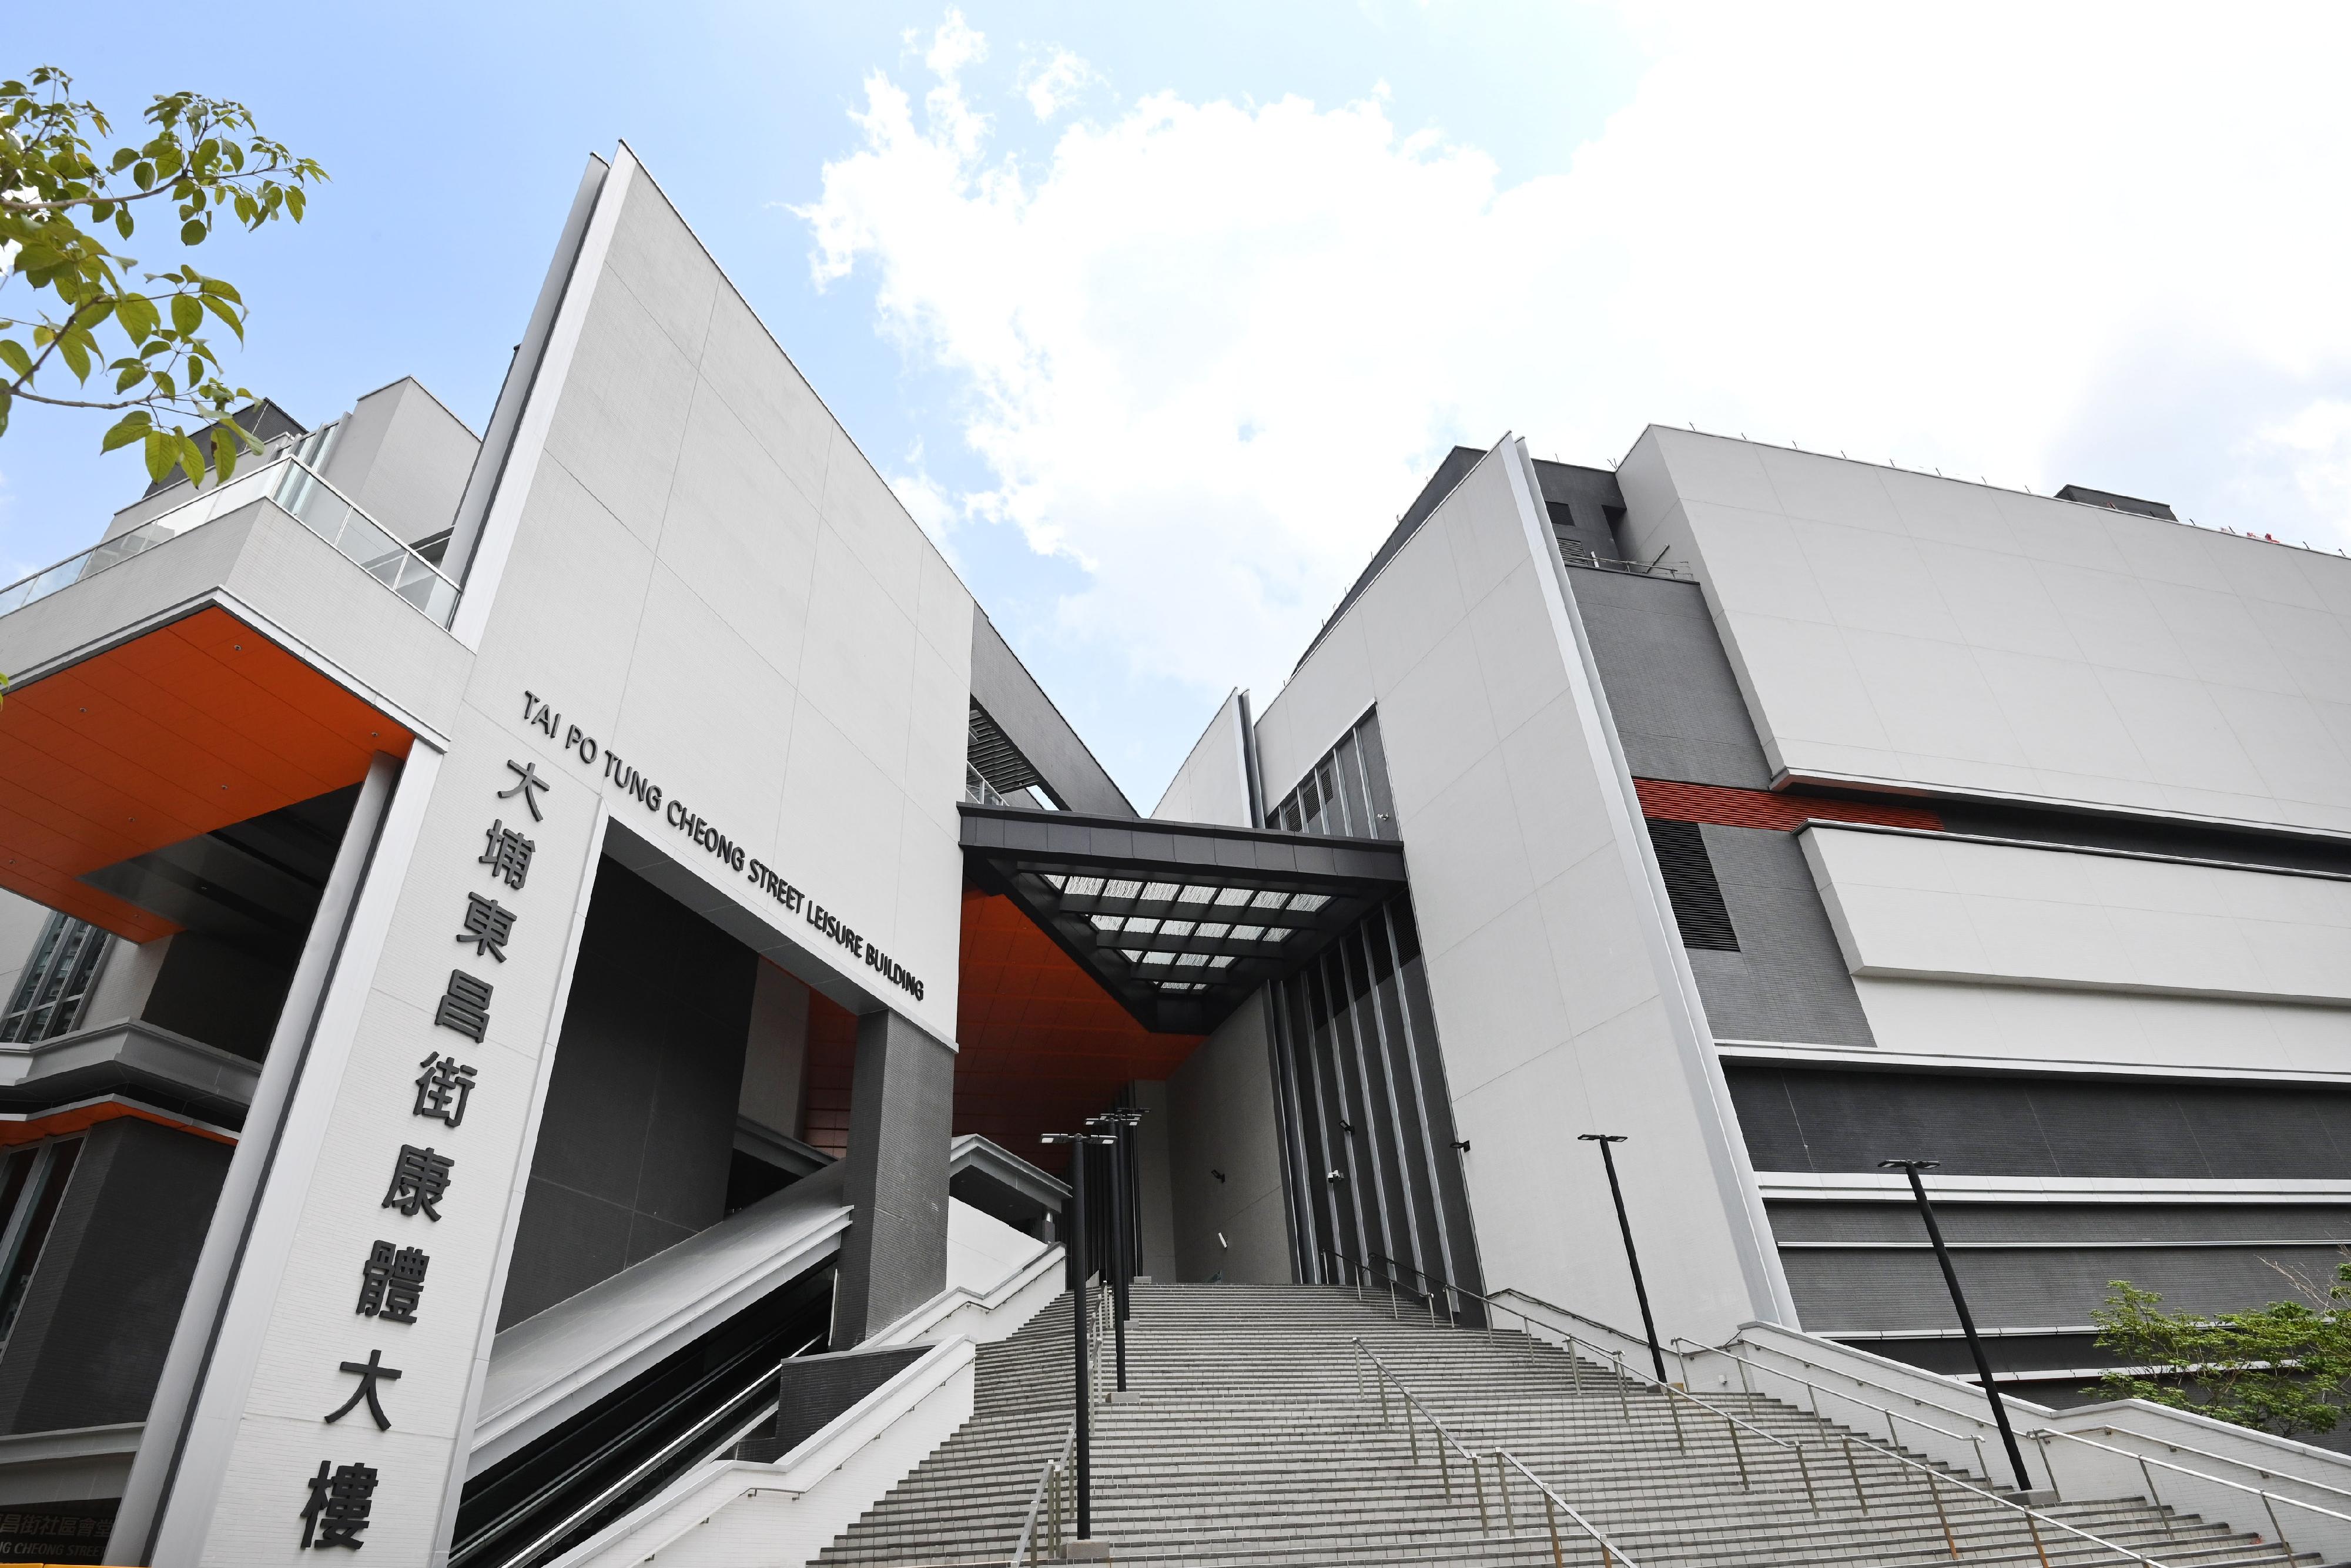 Tung Cheong Street Sports Centre, managed by the Leisure and Cultural Services Department (LCSD), will open for public use on August 15 (Monday). It is the sixth indoor sports centre under the LCSD in Tai Po District, and provides a wide range of leisure and sports facilities.